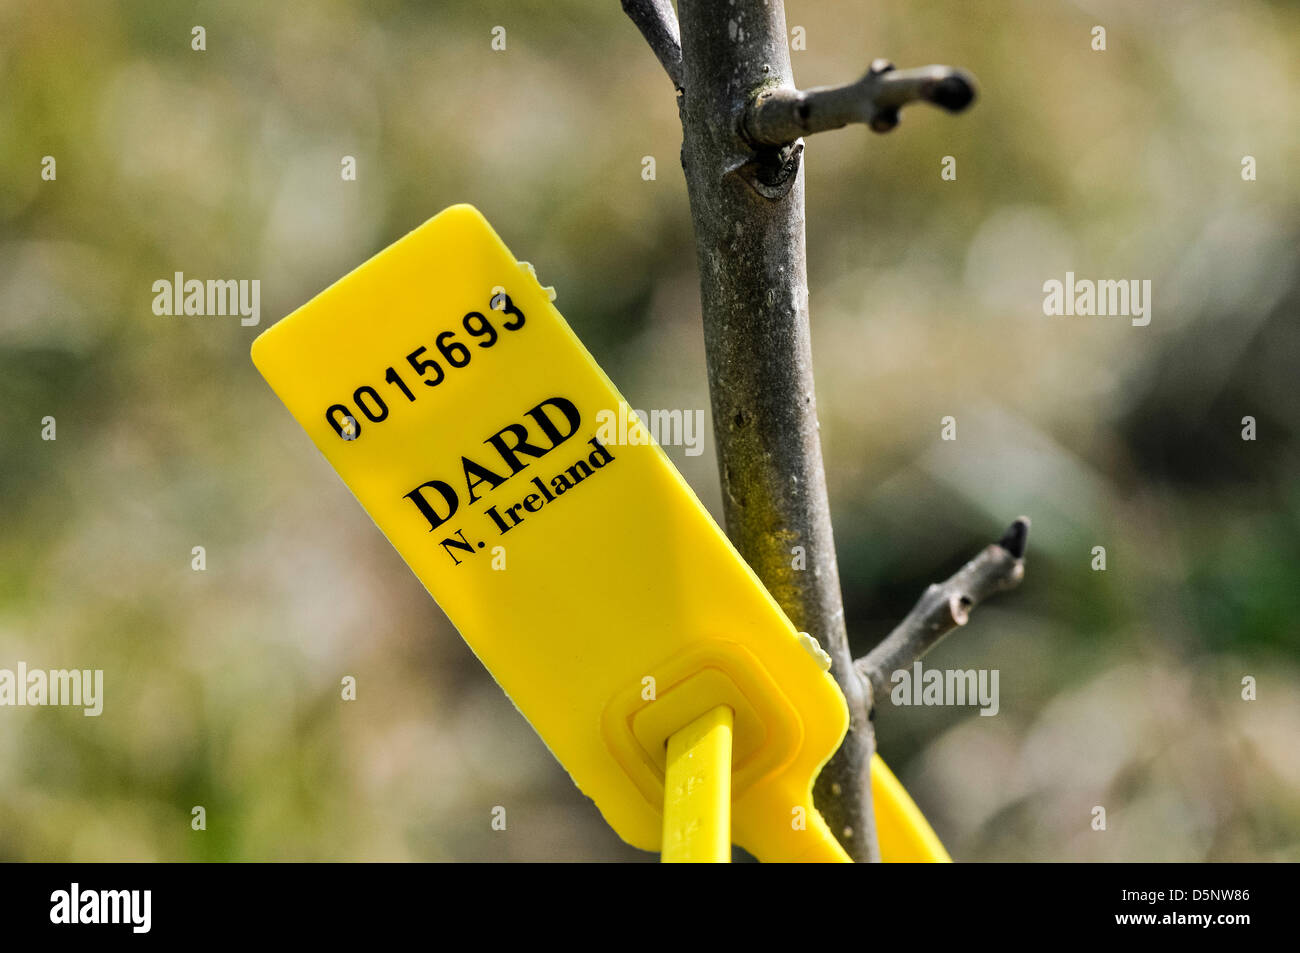 Carrickfergus, Northern Ireland, UK. 6th April 2013. A DARD tag indicates the discovery of the fungus Chalara fraxinea (ash dieback) on a sapling at the Jubilee Wood in Whitehead Credit: Stephen Barnes / Alamy Live News Stock Photo